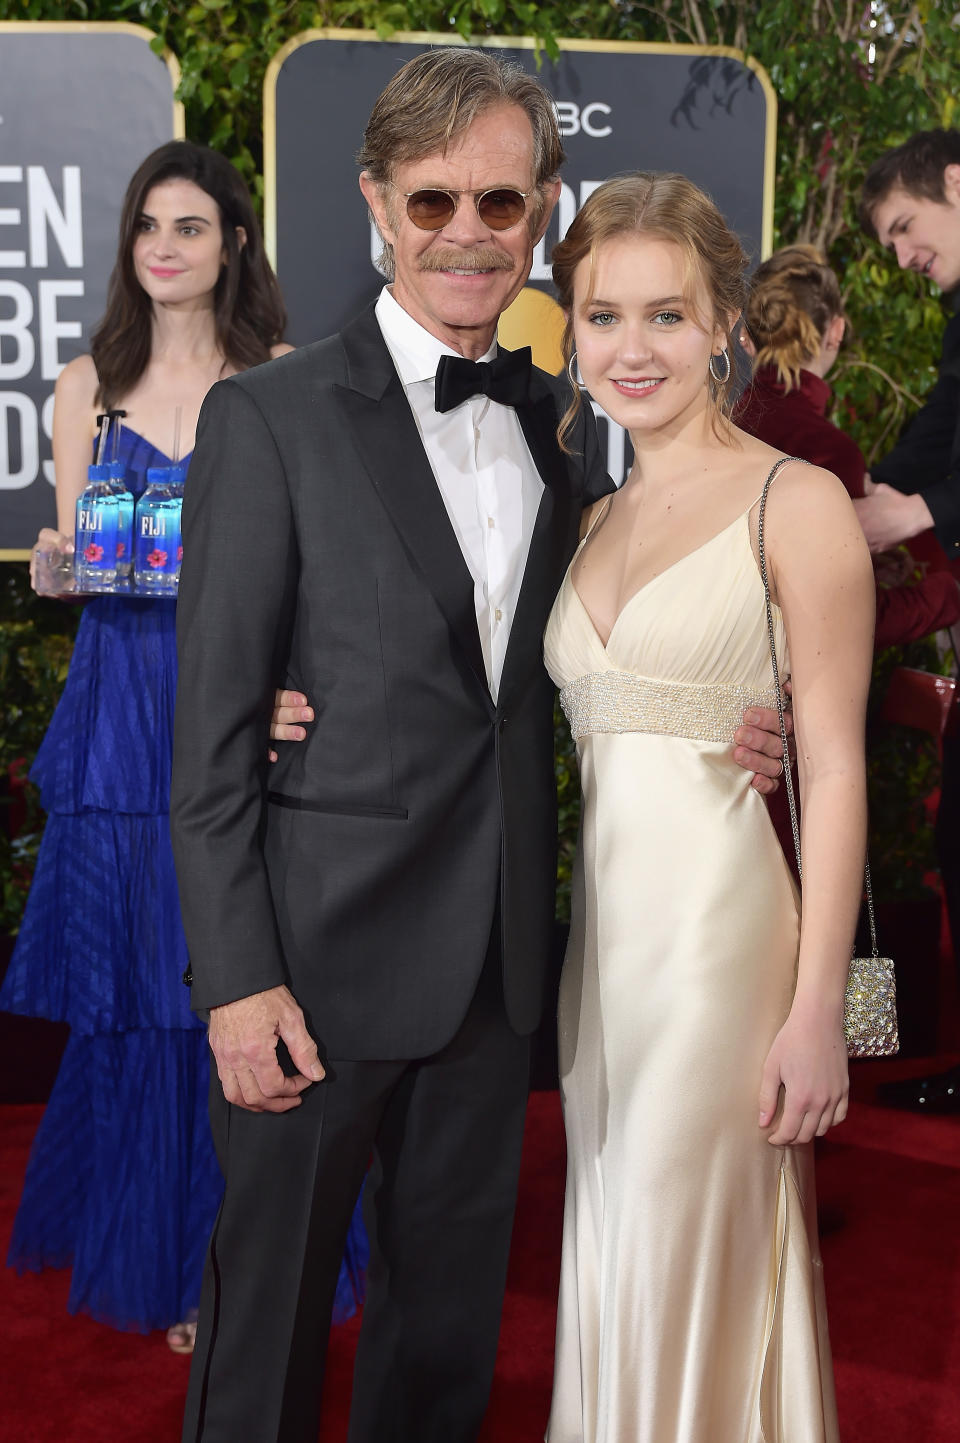 William H. Macy with his daughter Sophia Macy at the Golden Globes in January. According to court documents, Sophia’s SAT scores were boosted as part of the scam. (Photo: Getty Images)